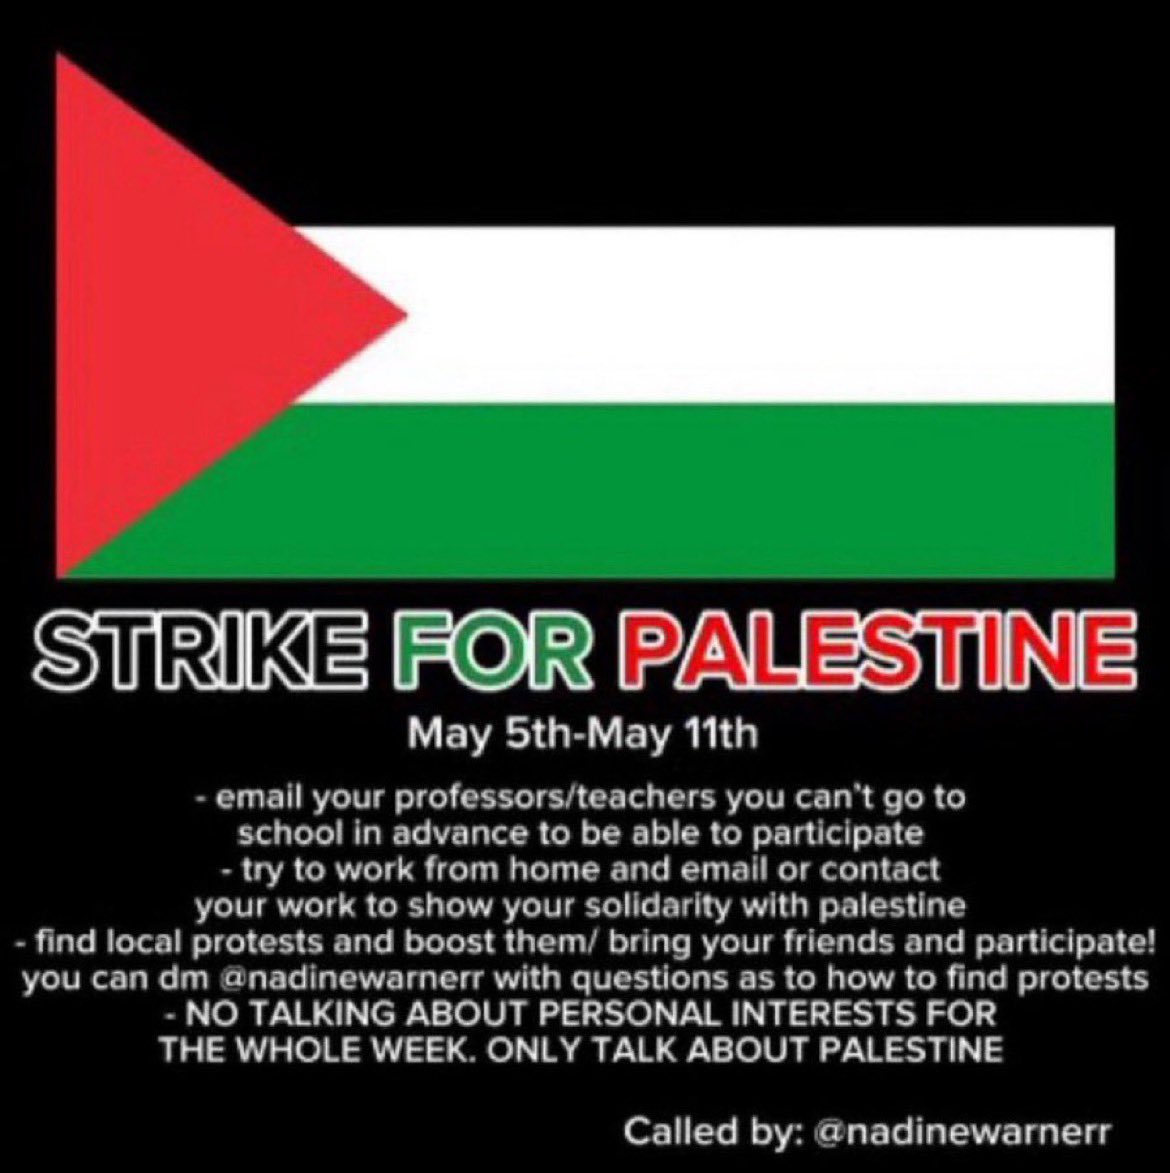 good morning everyone. please dont forget that we are still on a strike and it is important to keep talking about palestine. block all celebrities operation has started and all of a sudden all the celebrities are shaken to their core and speaking up. do not forget that we are the…